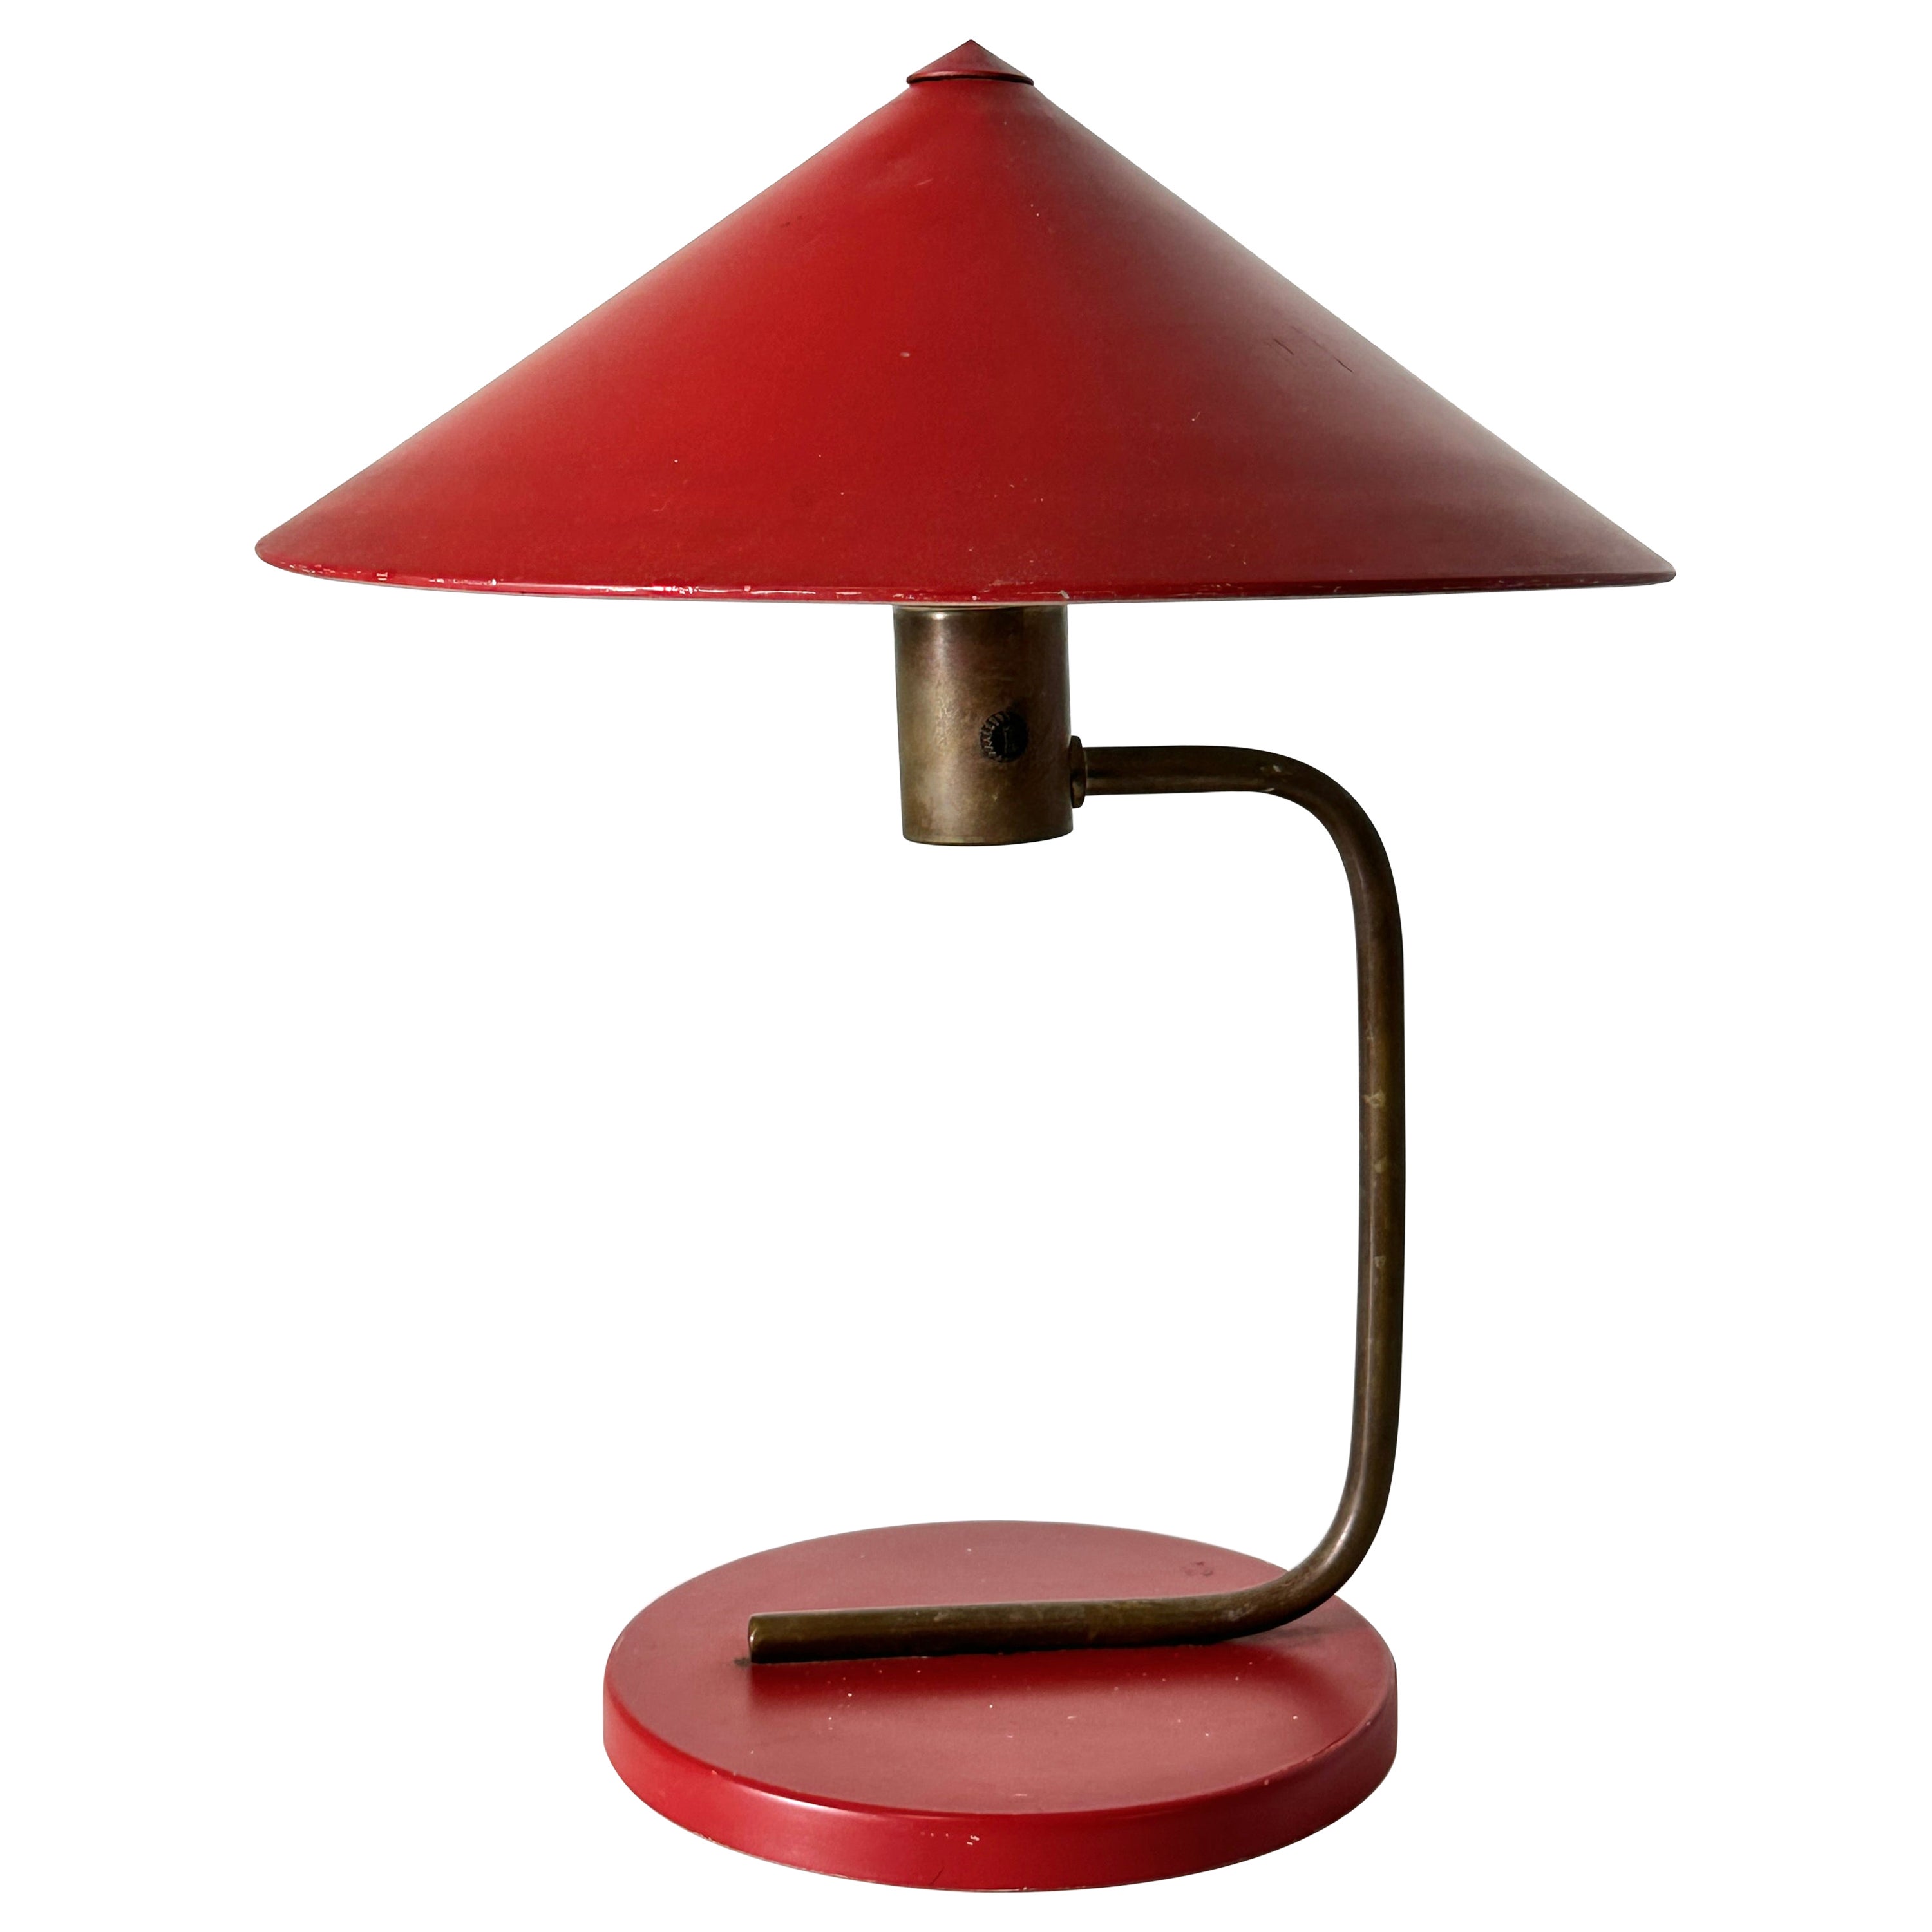 Walter Von Nessen Red Enamel and Brass Table Lamp 1930s Art Deco For Sale